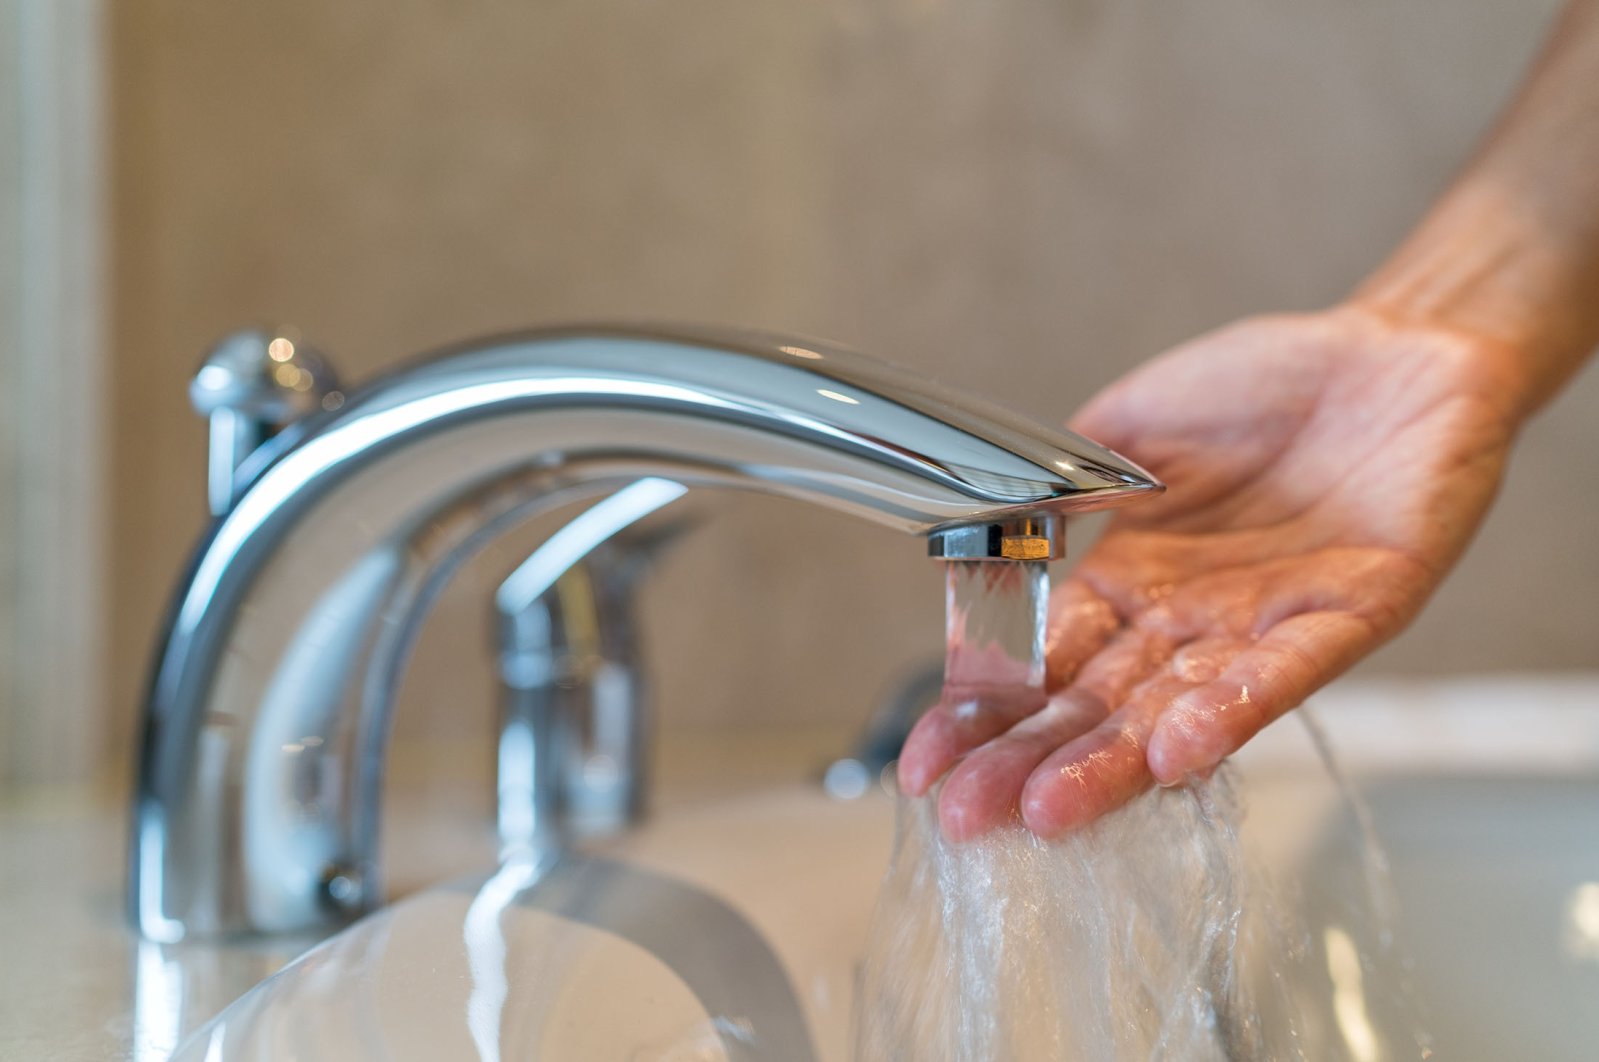 Woman taking a bath at home, checking the temperature and touching running water with her hand. (Shutterstock)